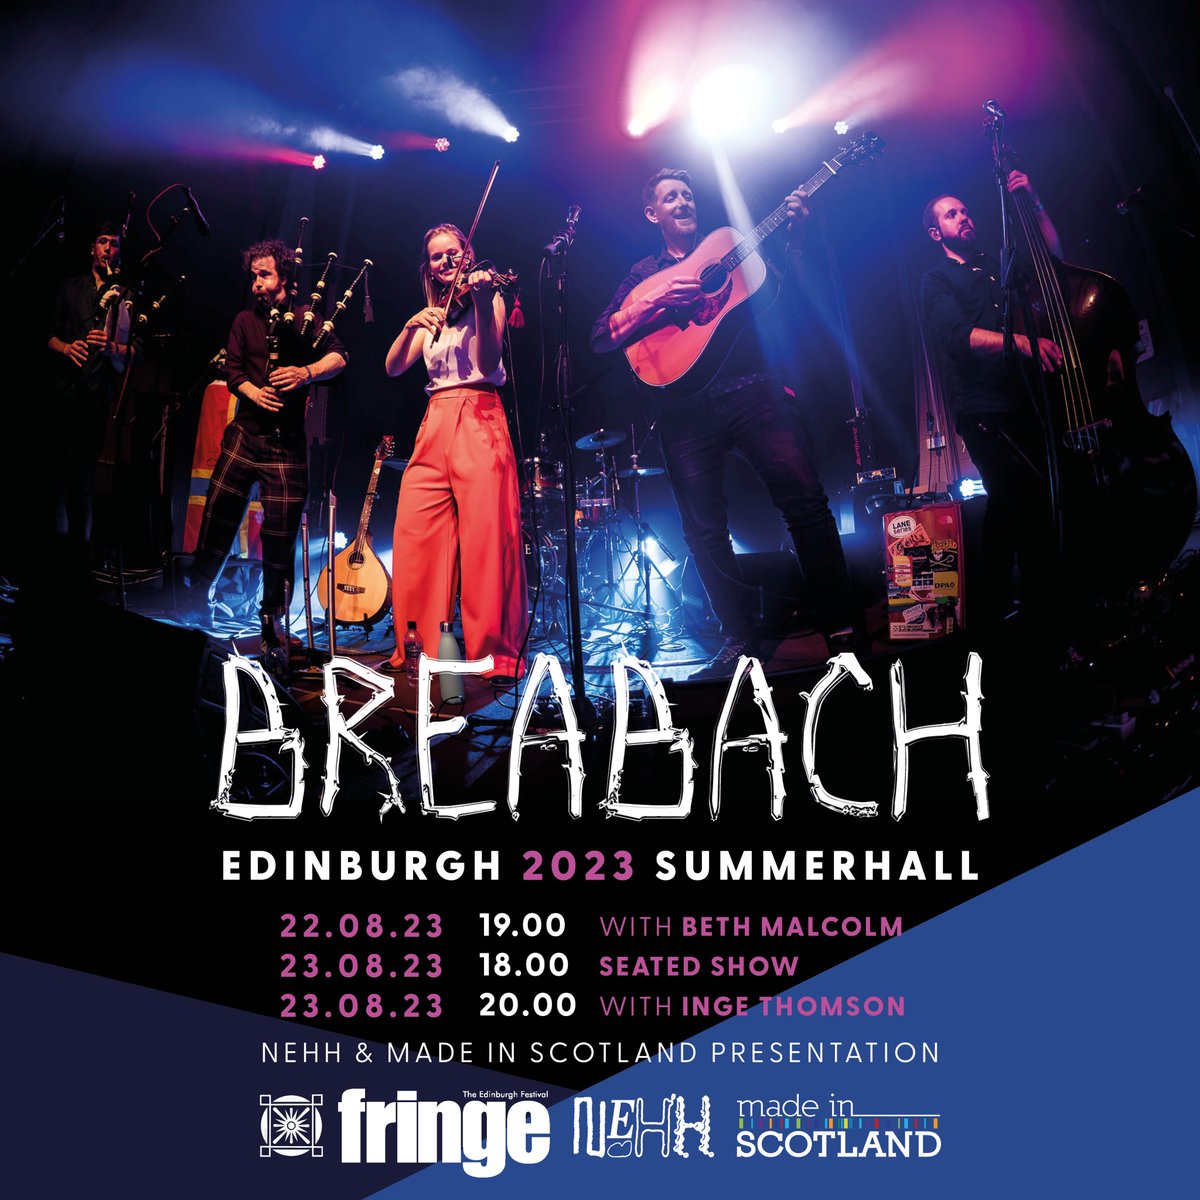 ~ Edinburgh ~ We're buzzing to come back to the @edfringe for three special shows at @Summerhallery 😁 22.08 @ 19.00 with @BethMalc 23.08 @ 18.00 (seated show) 23.08 @ 20.00 with @IngeThomson 🎫 tinyurl.com/4nry9aar Presented by NEHH & @MadeinScotShows 📸 @lievephoto